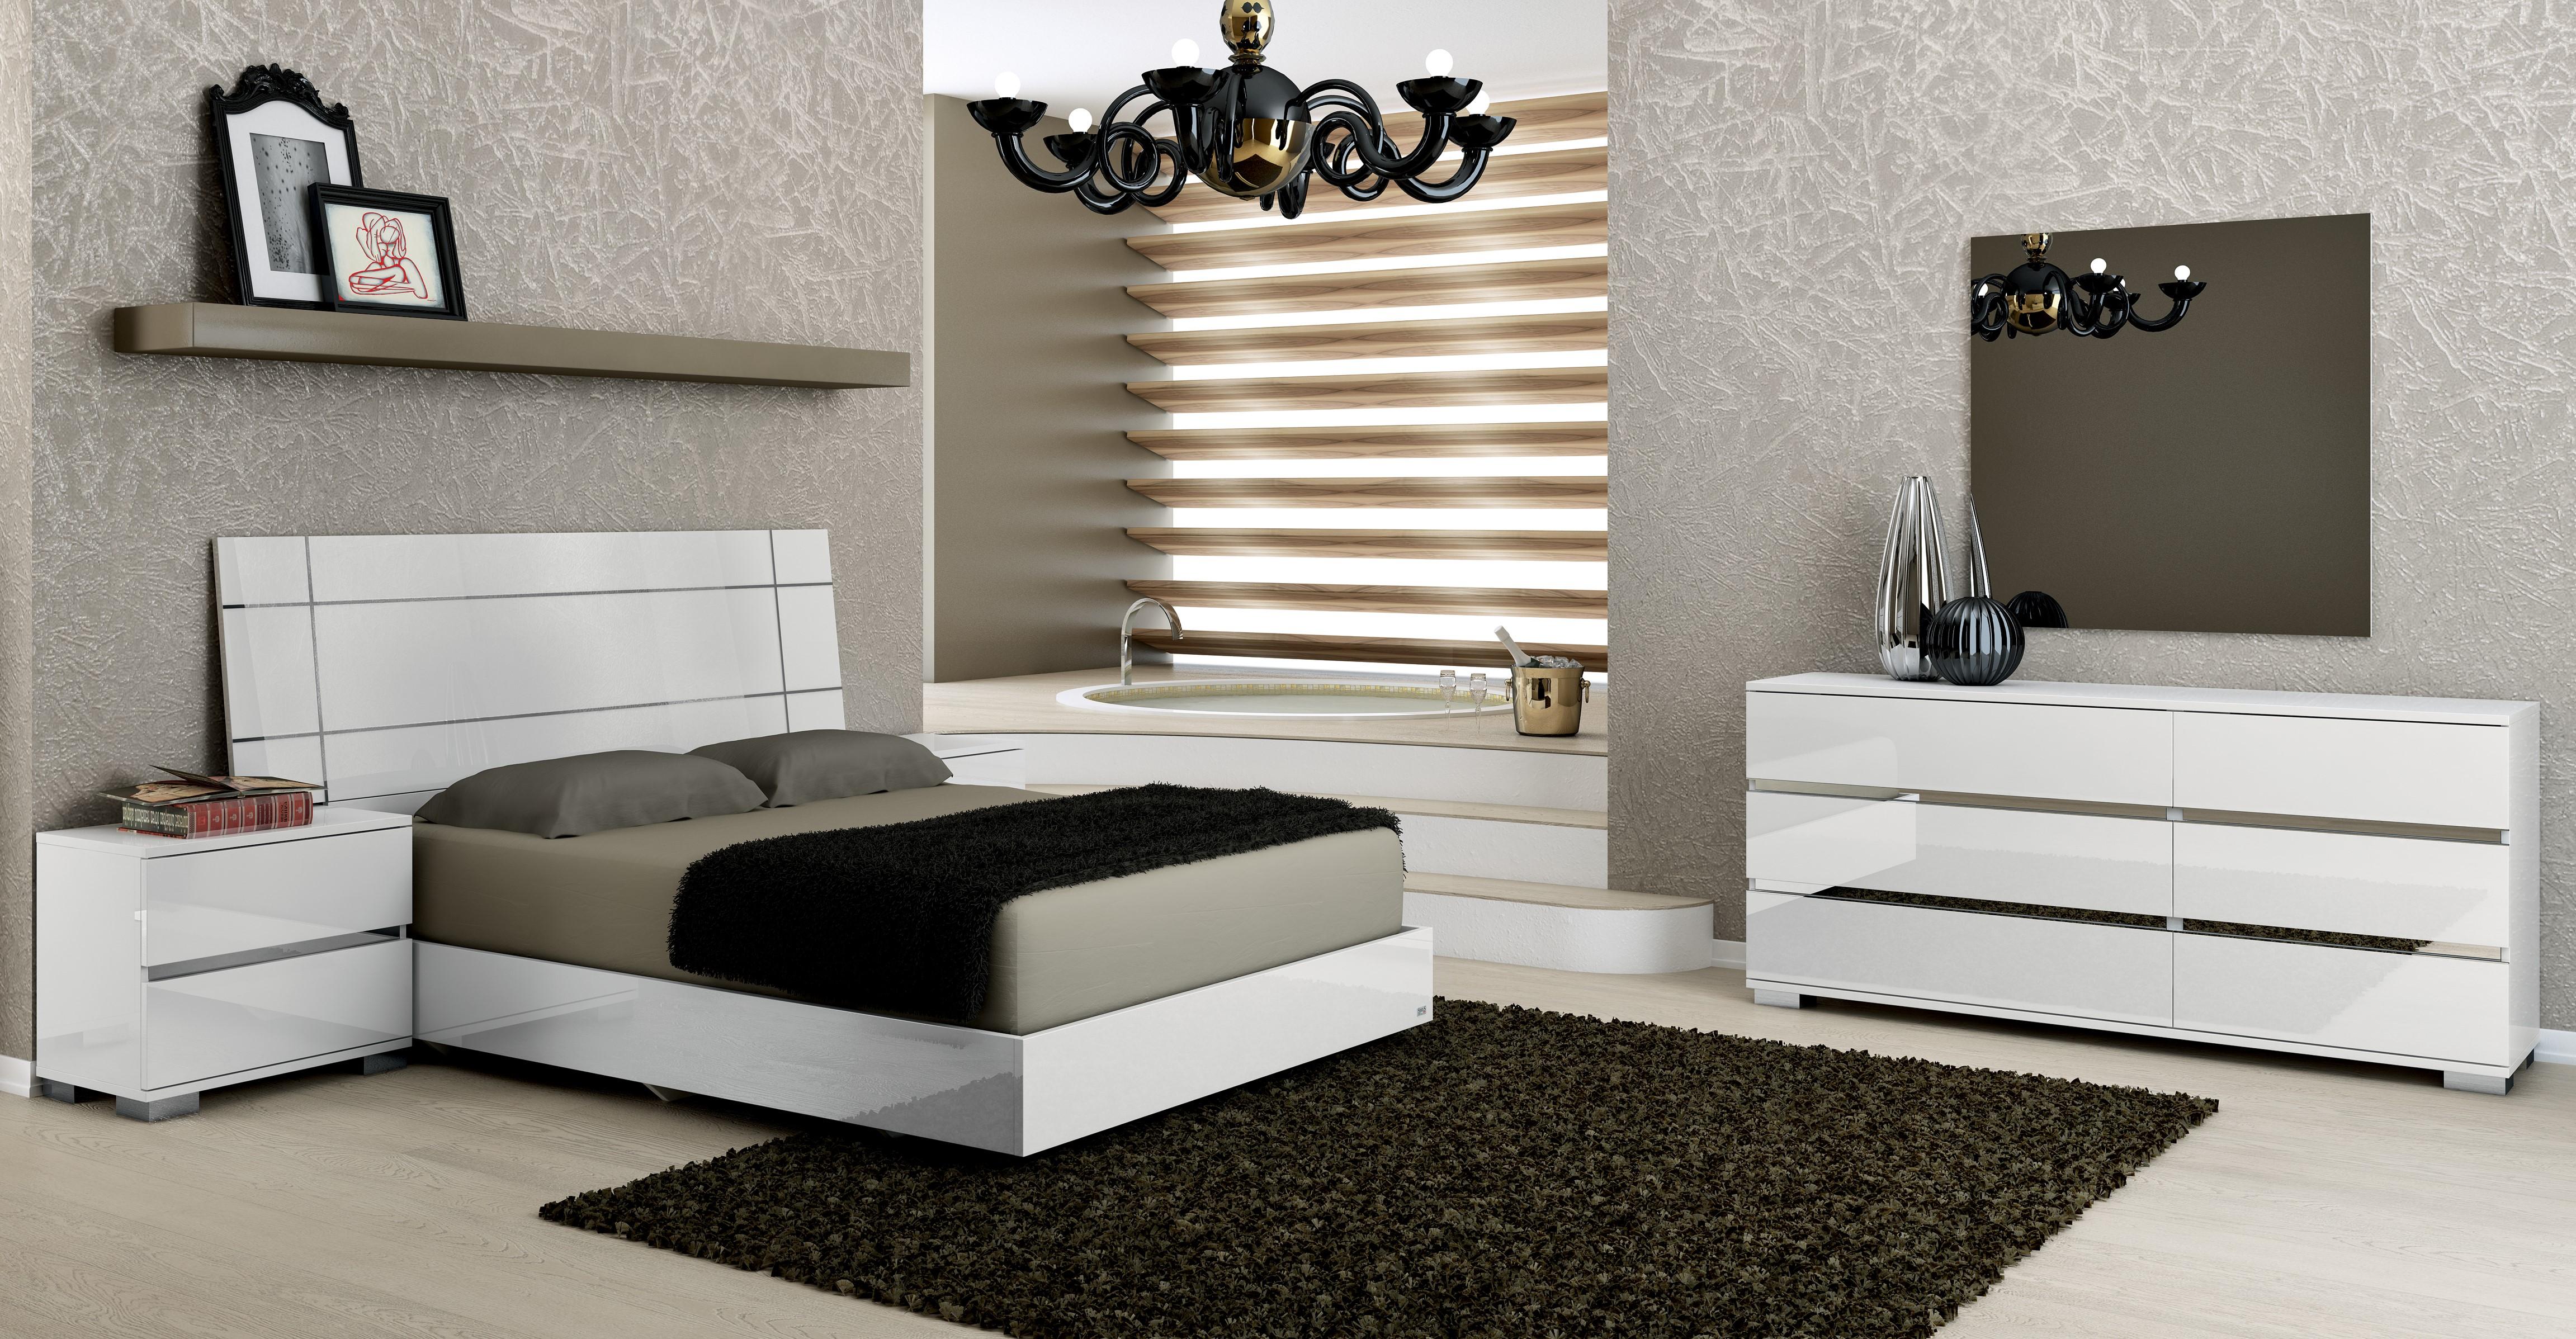 

    
At Home USA Dream White High Gloss Lacquer Queen Bedroom Set 5Pcs Made in Italy
